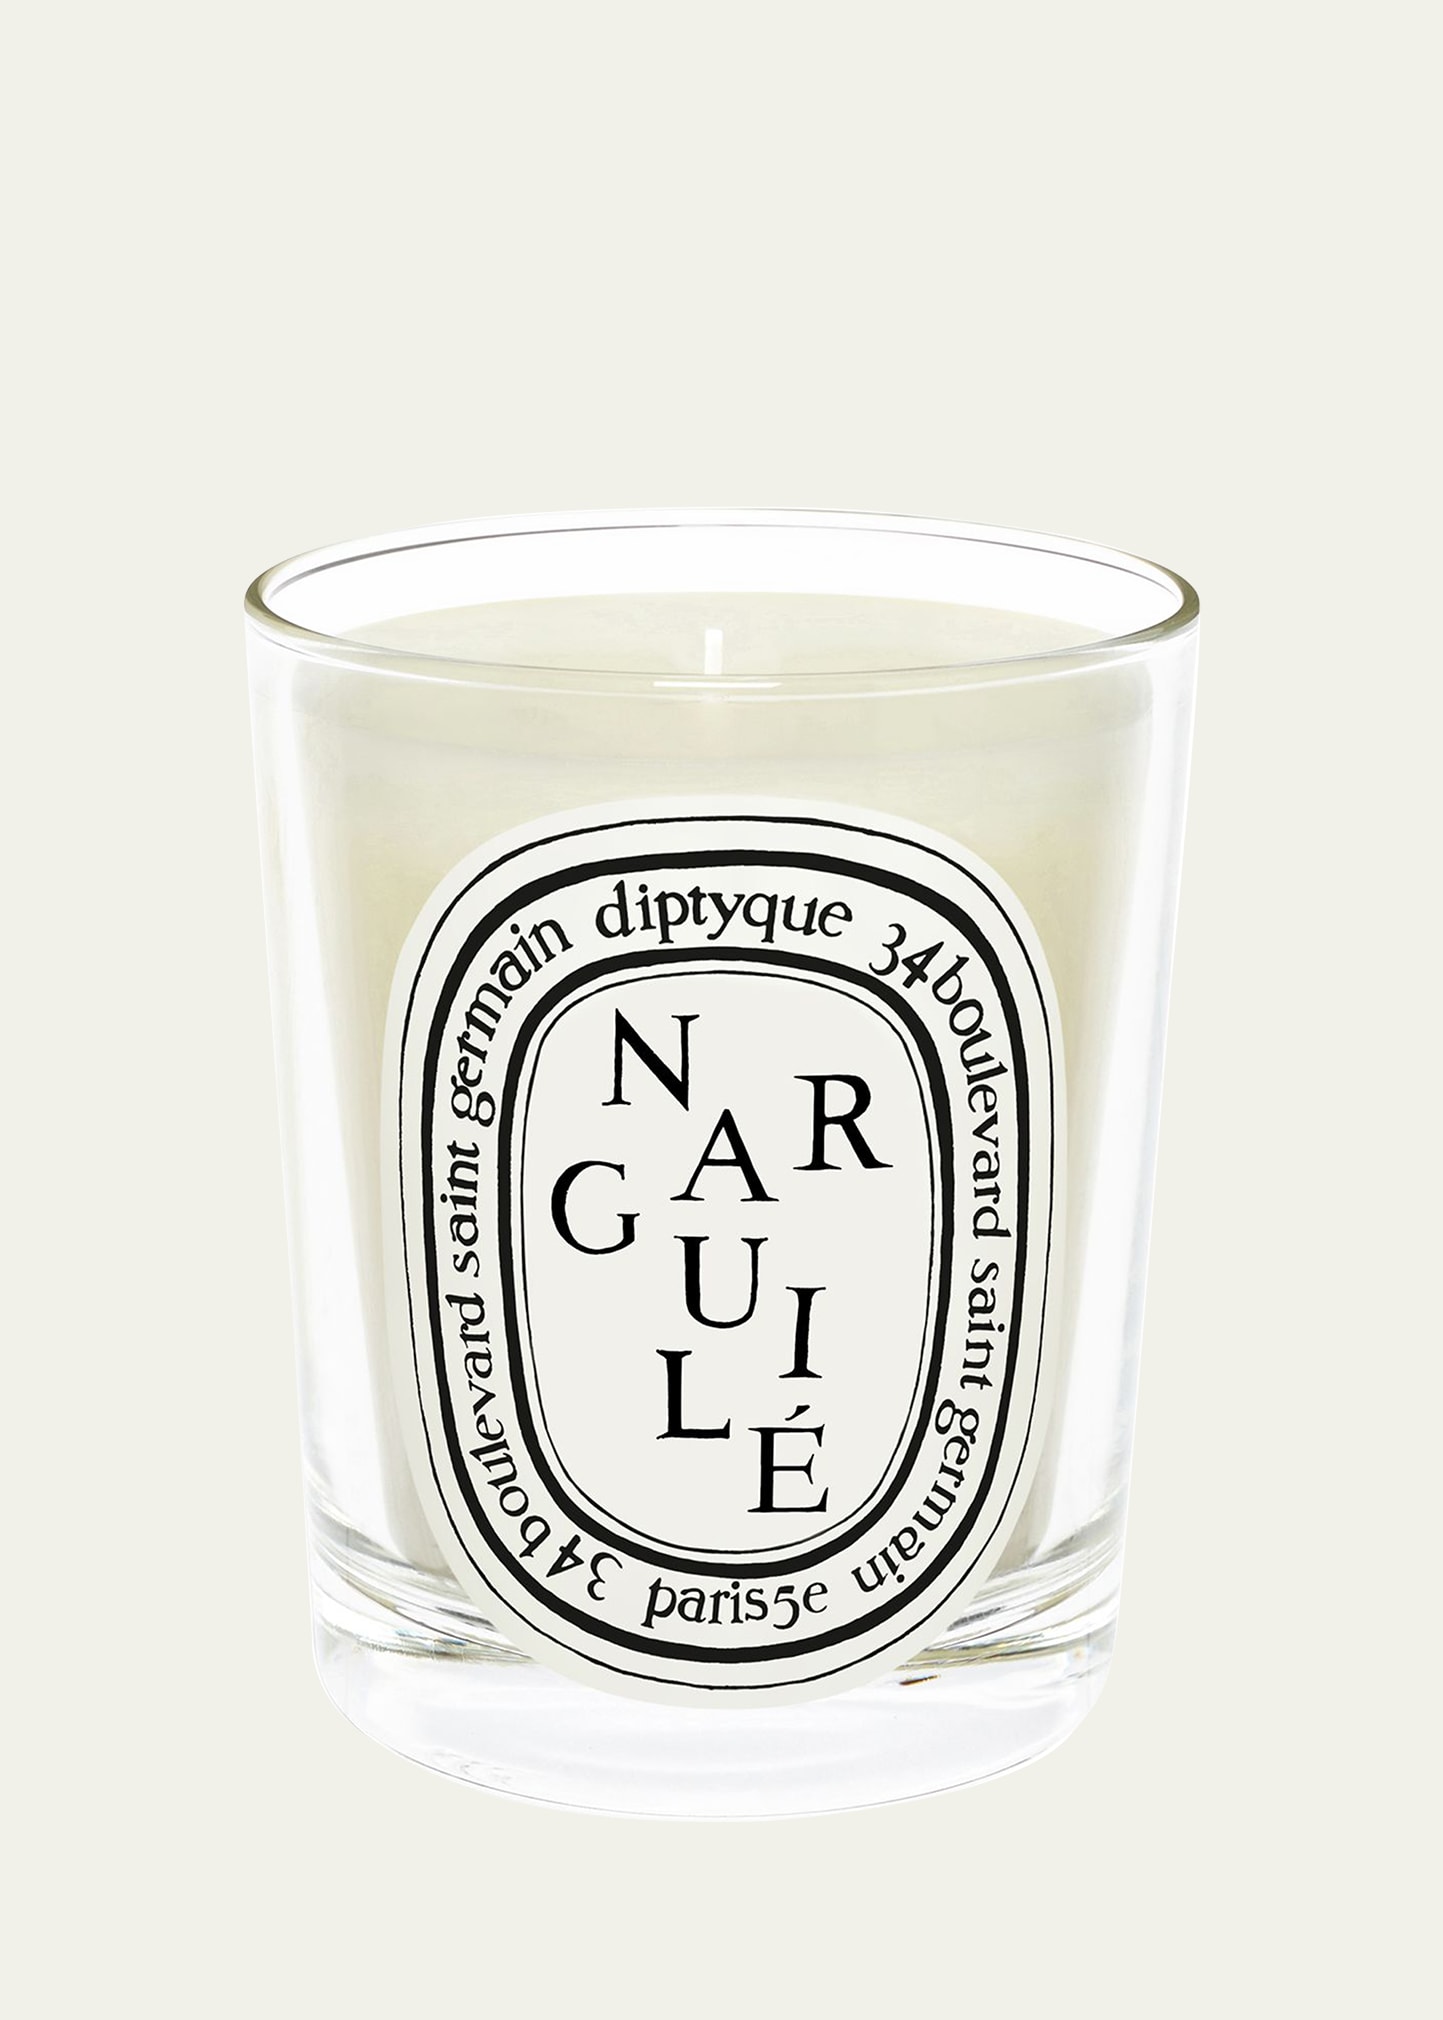 DIPTYQUE Narguile Scented Candle, 6.5 oz.